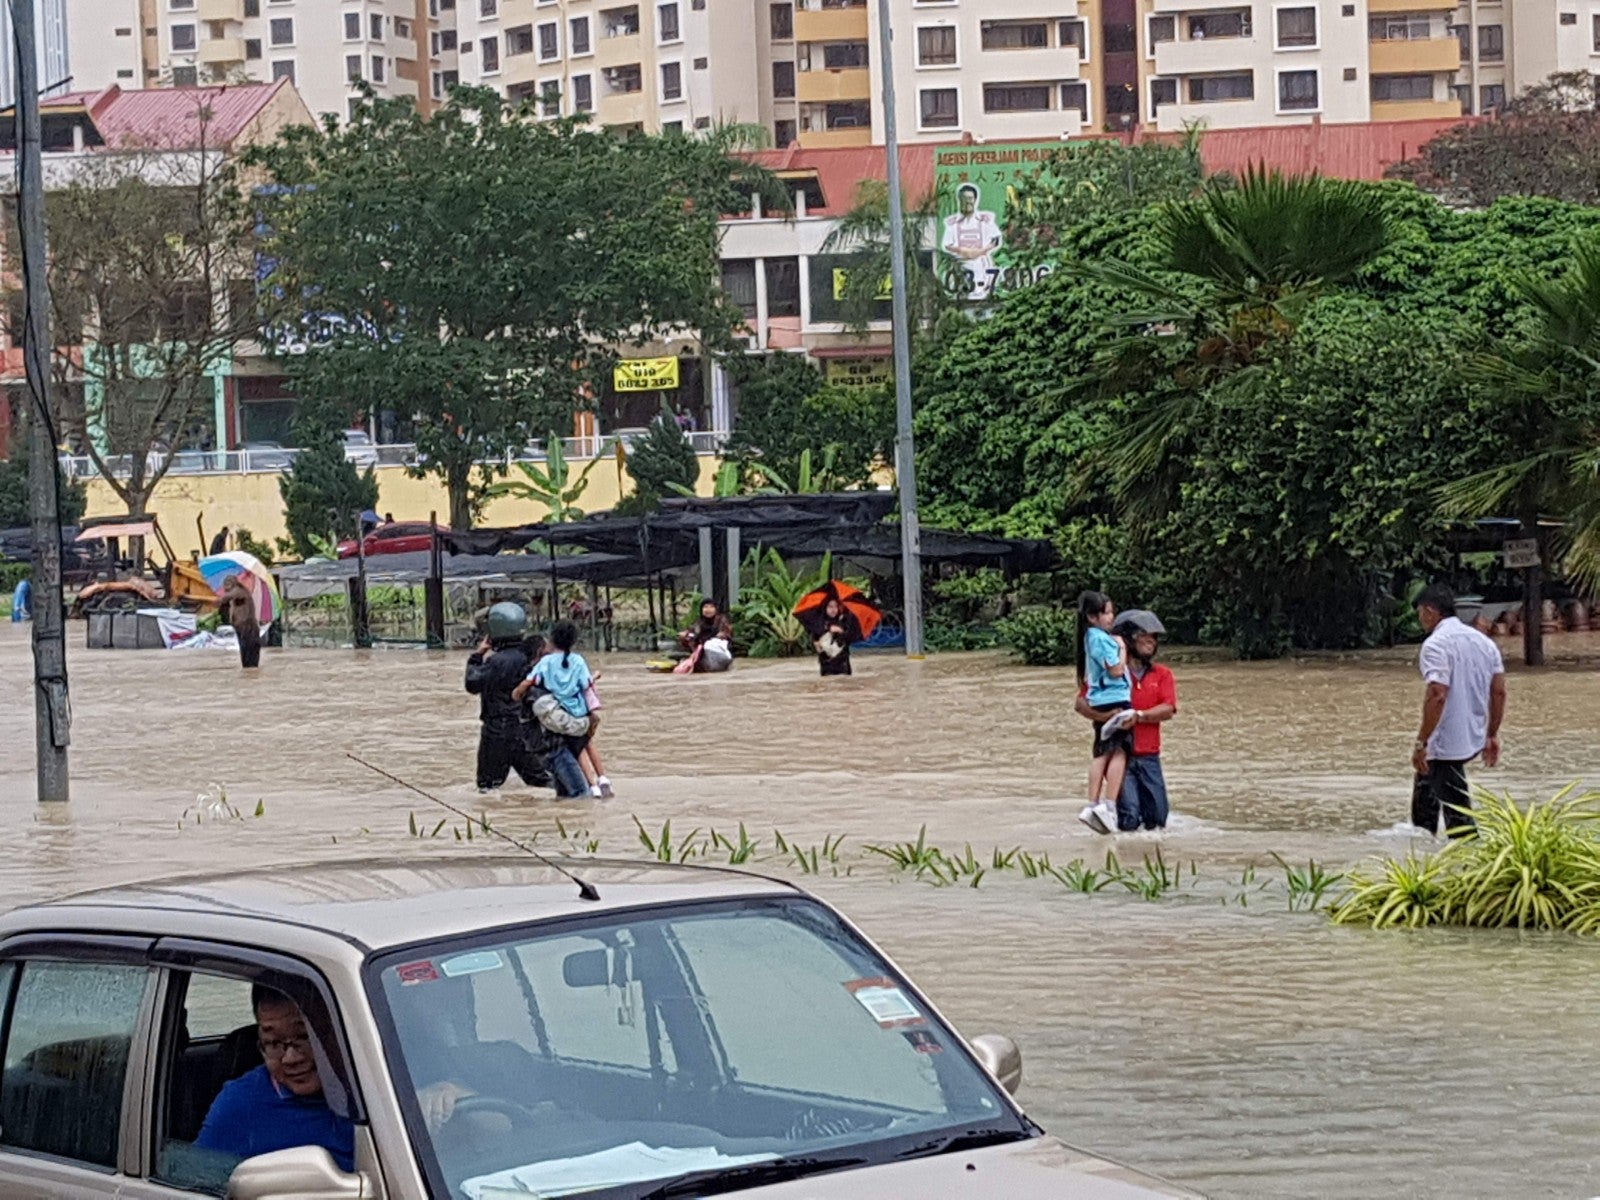 Inspiring Motorists Help Carry Scared School Children Trapped in Bus During PJ Flash Flood - WORLD OF BUZZ 5